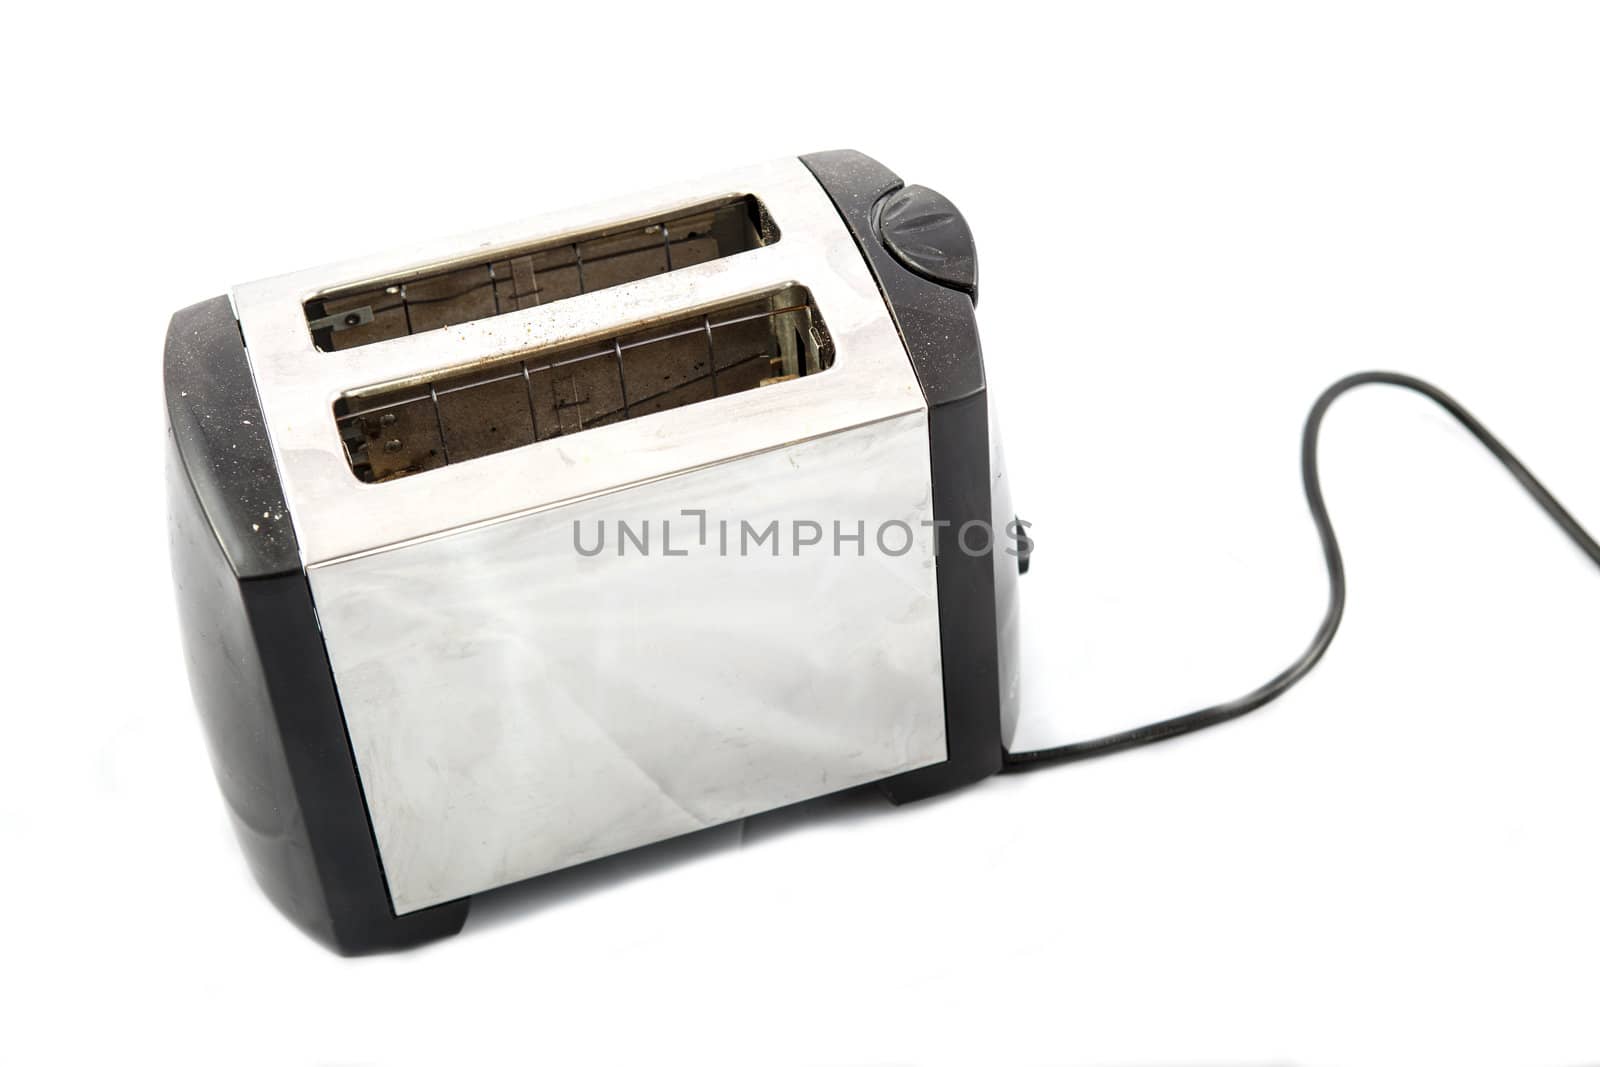 Toaster by PhotoWorks